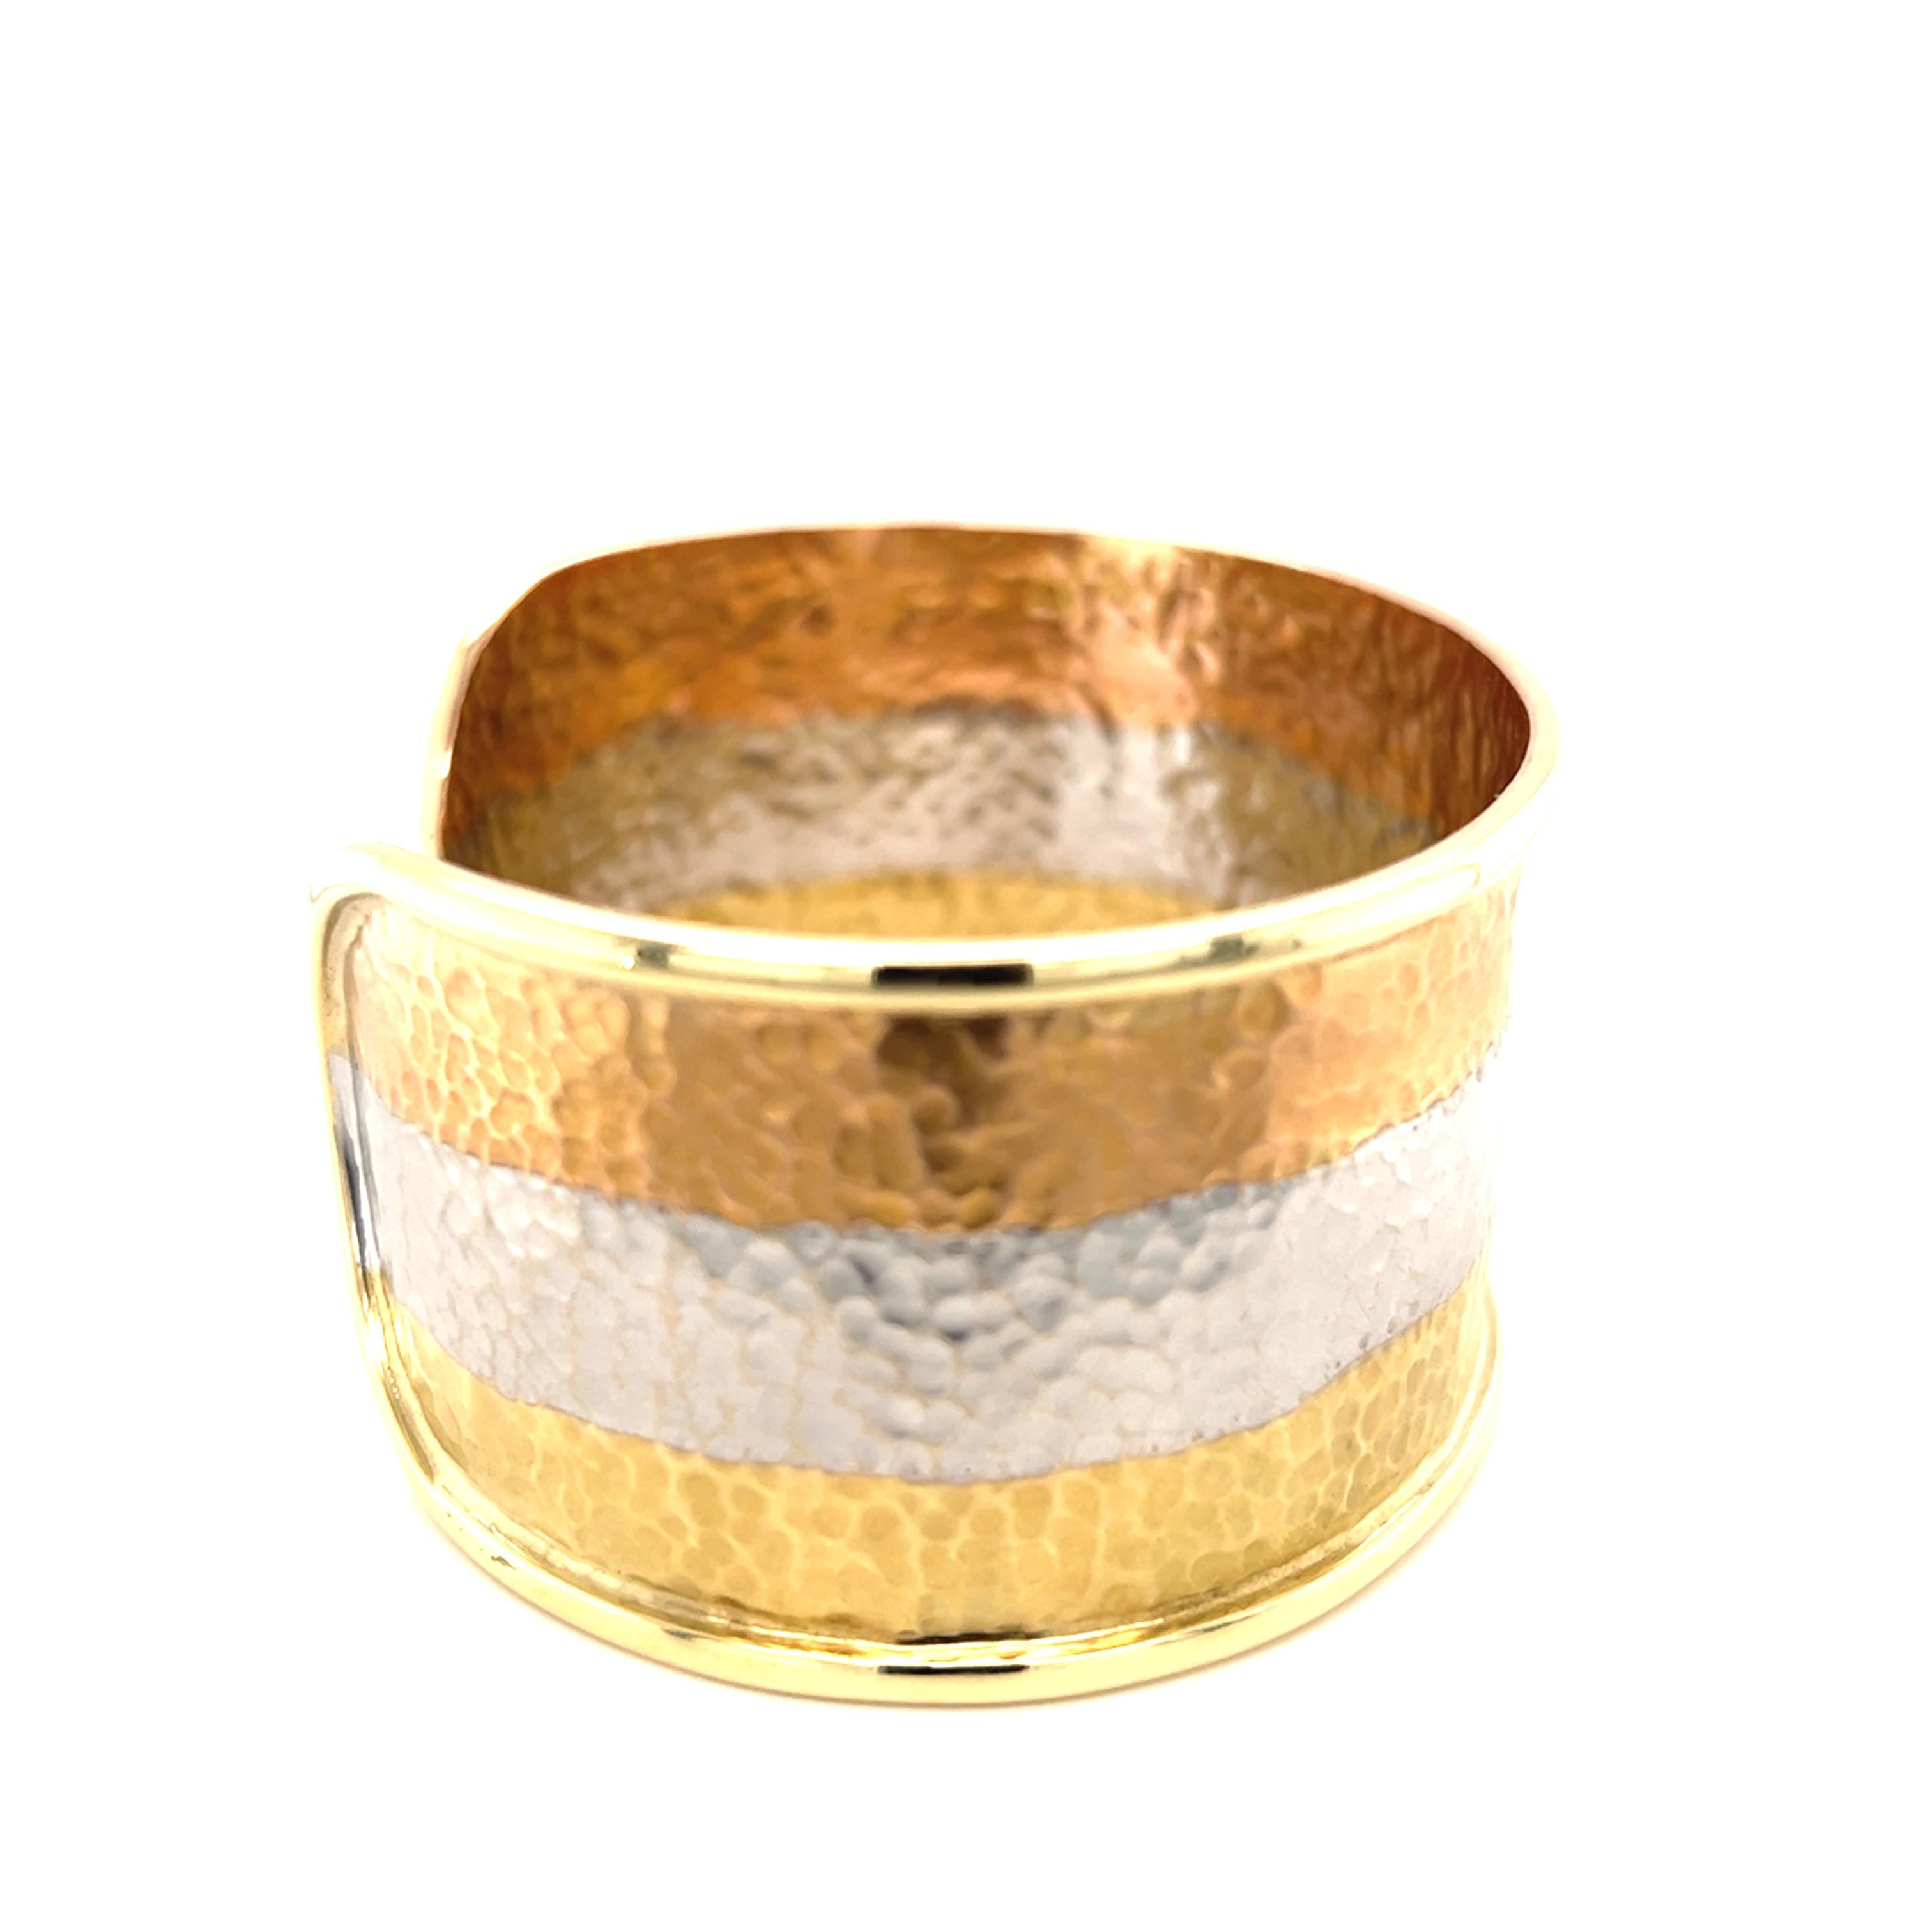 One 14-karat yellow, white, and rose hammered gold 34mm wide cuff bracelet designed by Cetas, stamped 